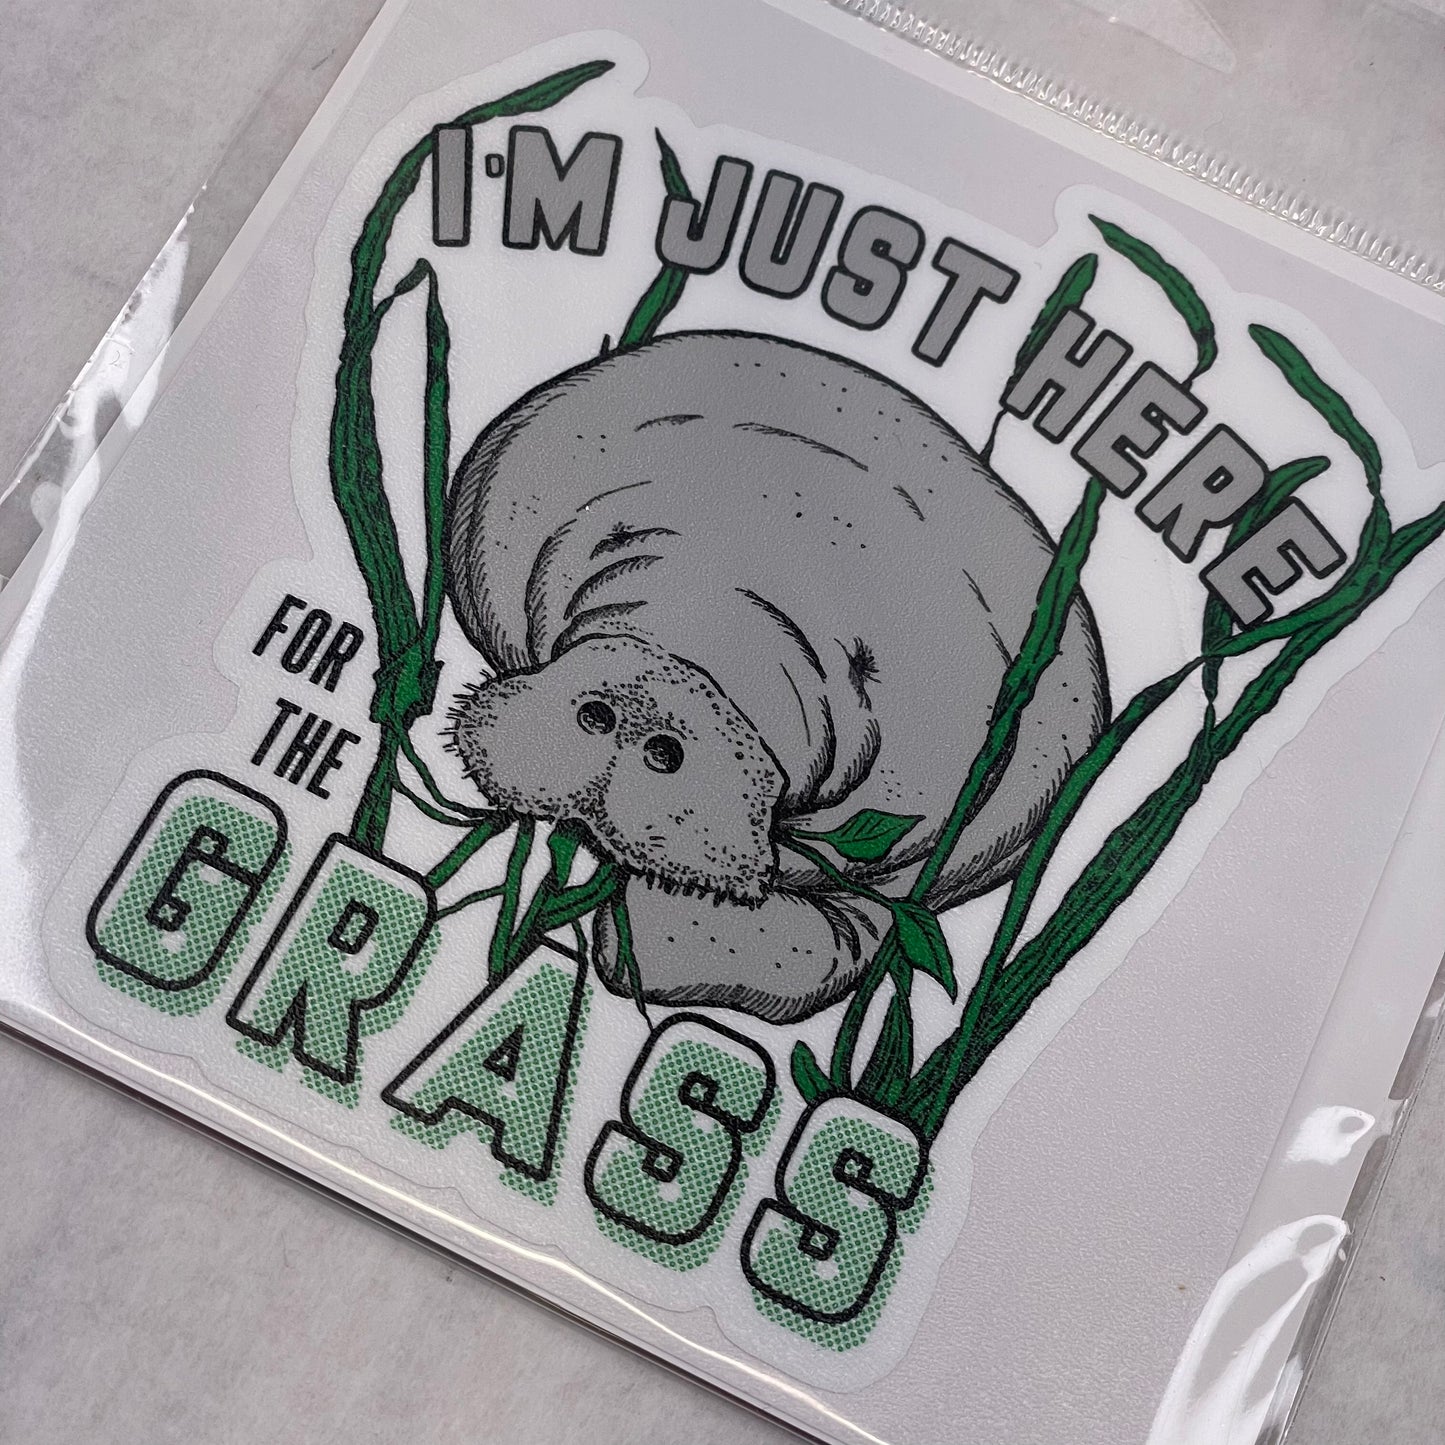 I'm Just Here for the Grass Manatee Sticker